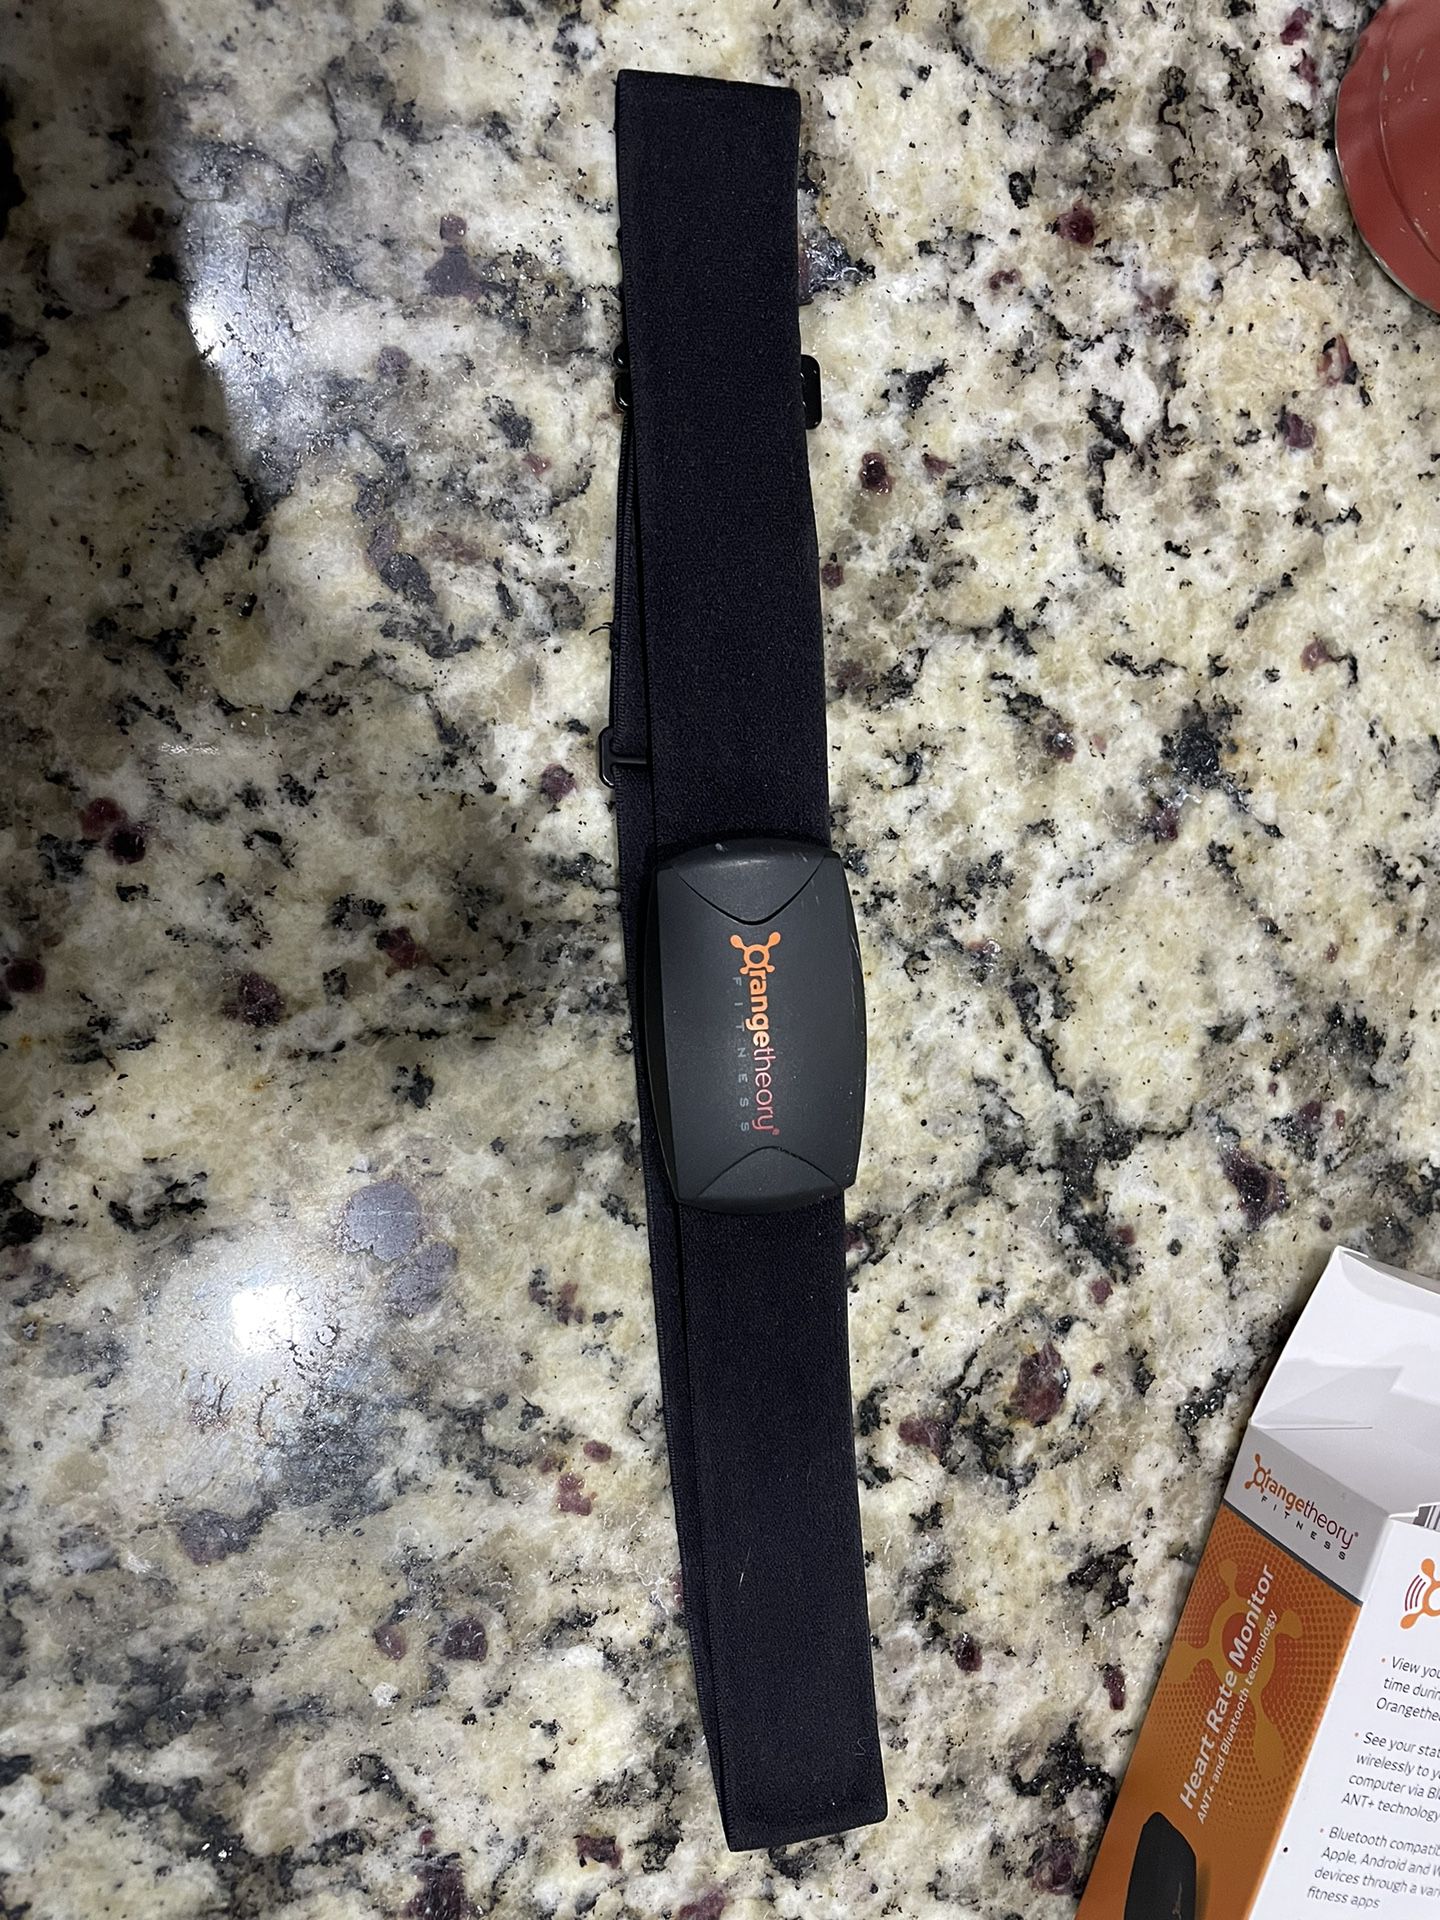 Orange theory Heart Monitor for Sale in Merrionett Pk, IL - OfferUp